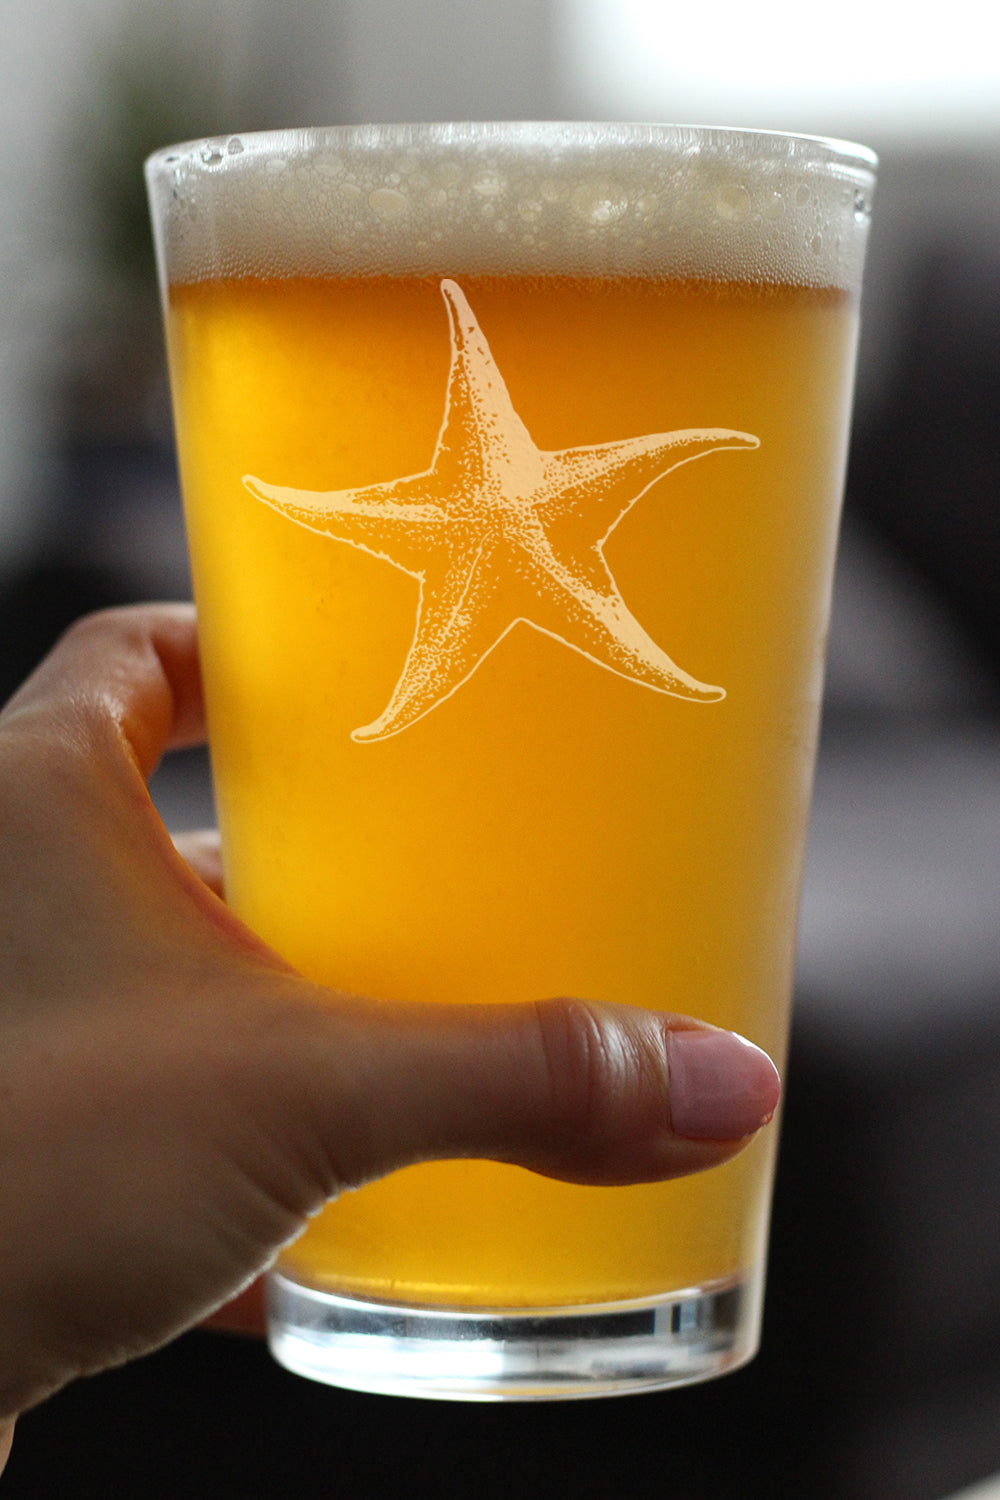 Starfish Pint Glass for Beer - Beach Themed Decor and Decorative Ocean Glassware Gifts for Women and Men - 16 Oz Glasses